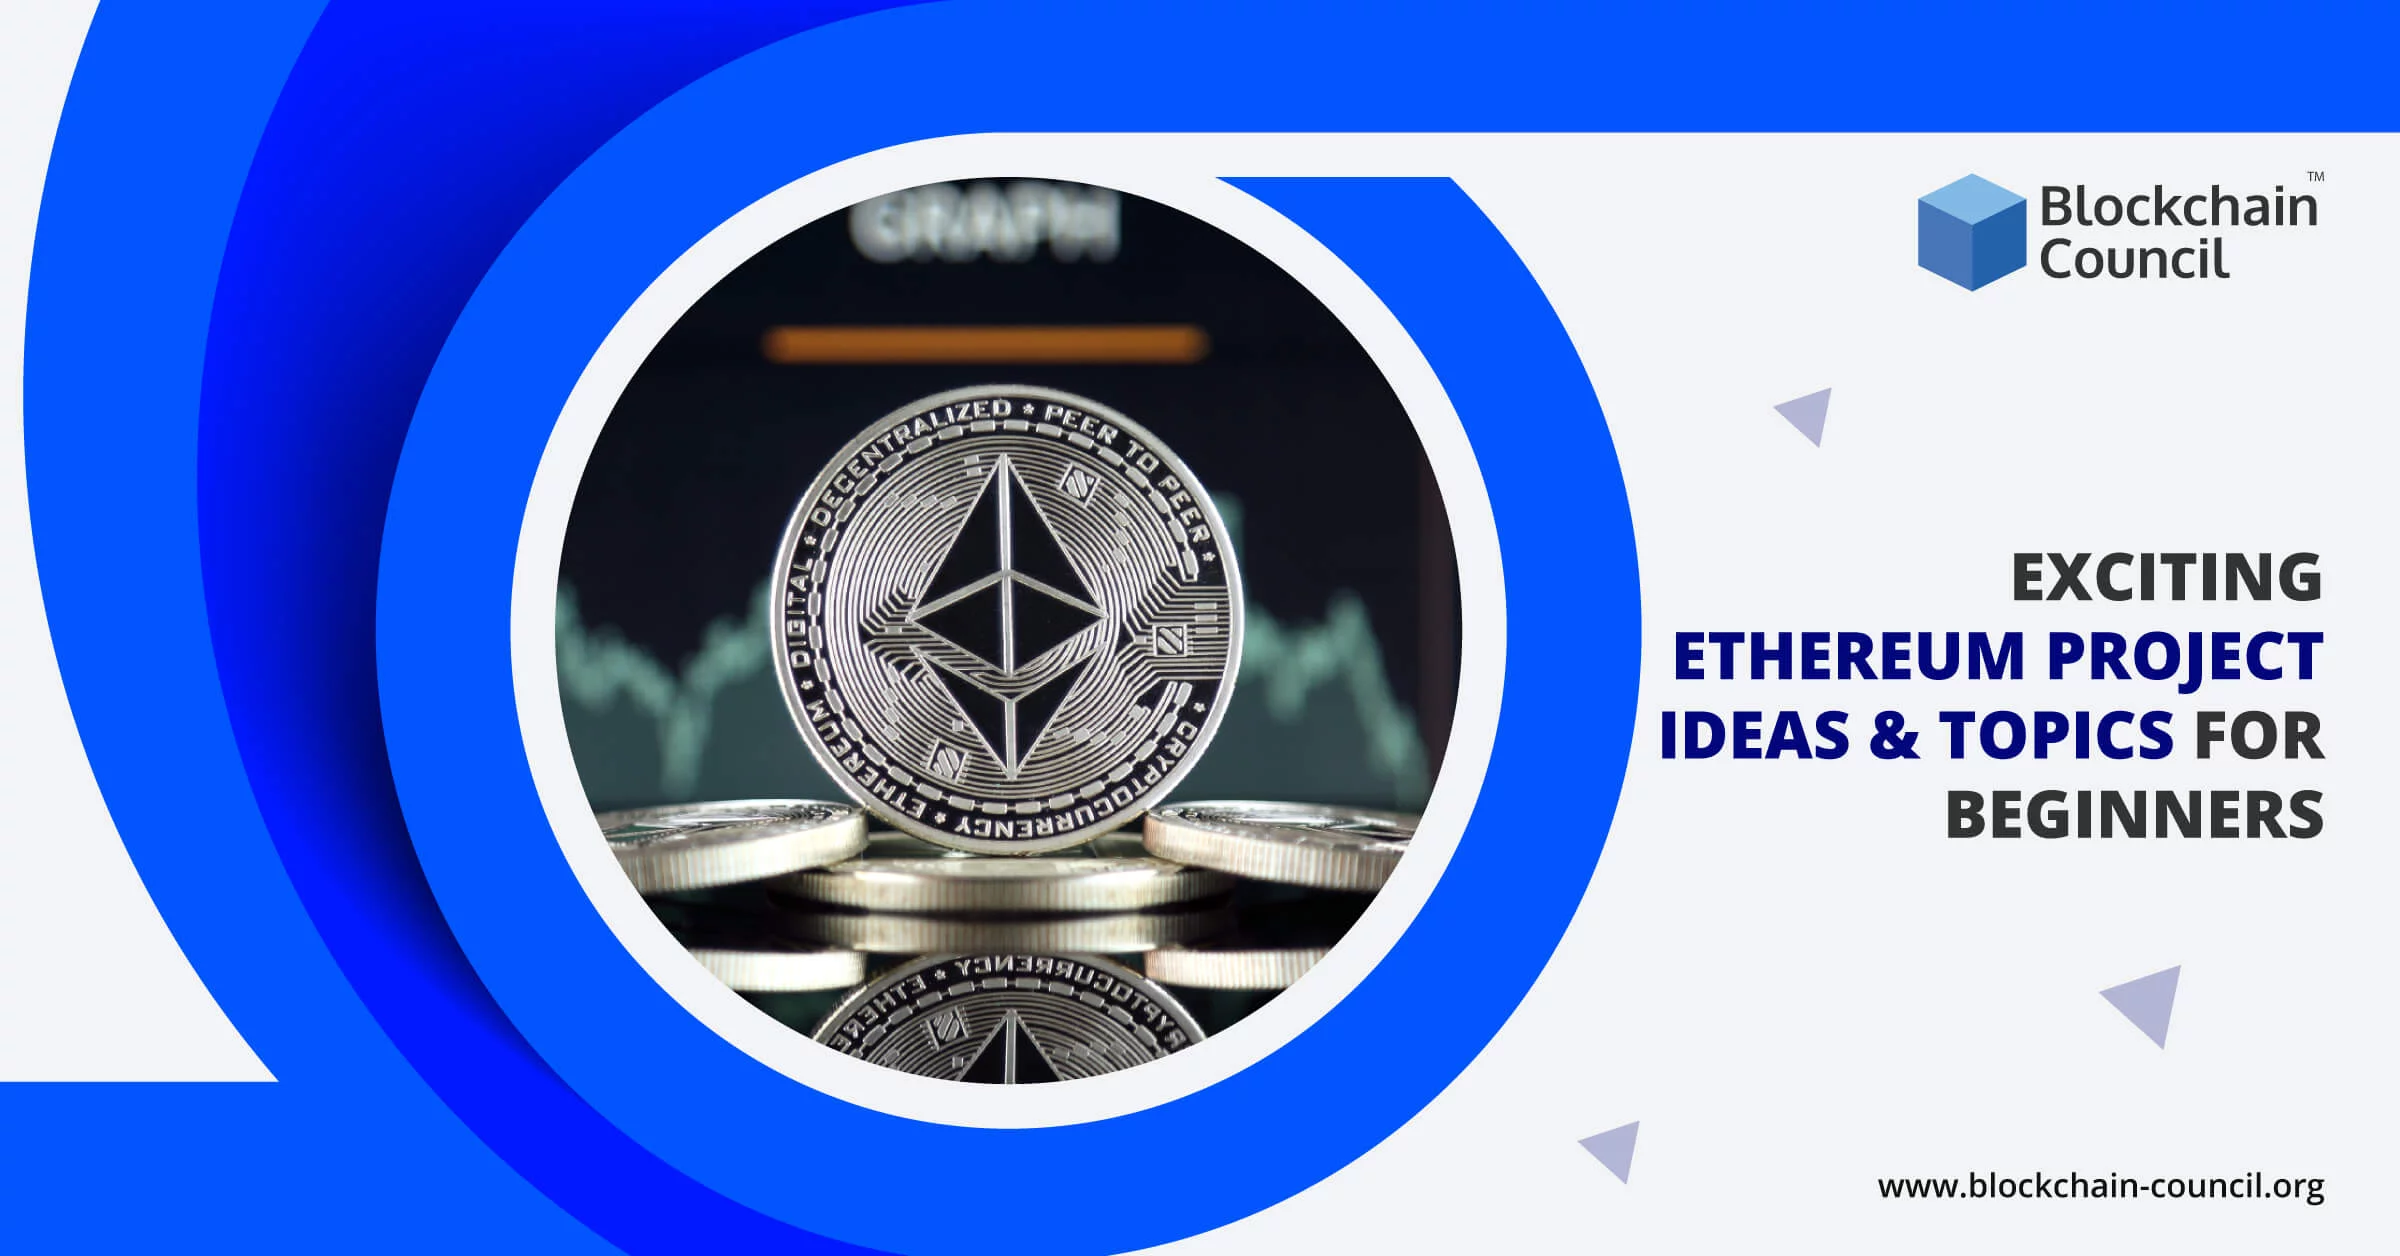 Exciting Ethereum Project Ideas & Topics for Beginners